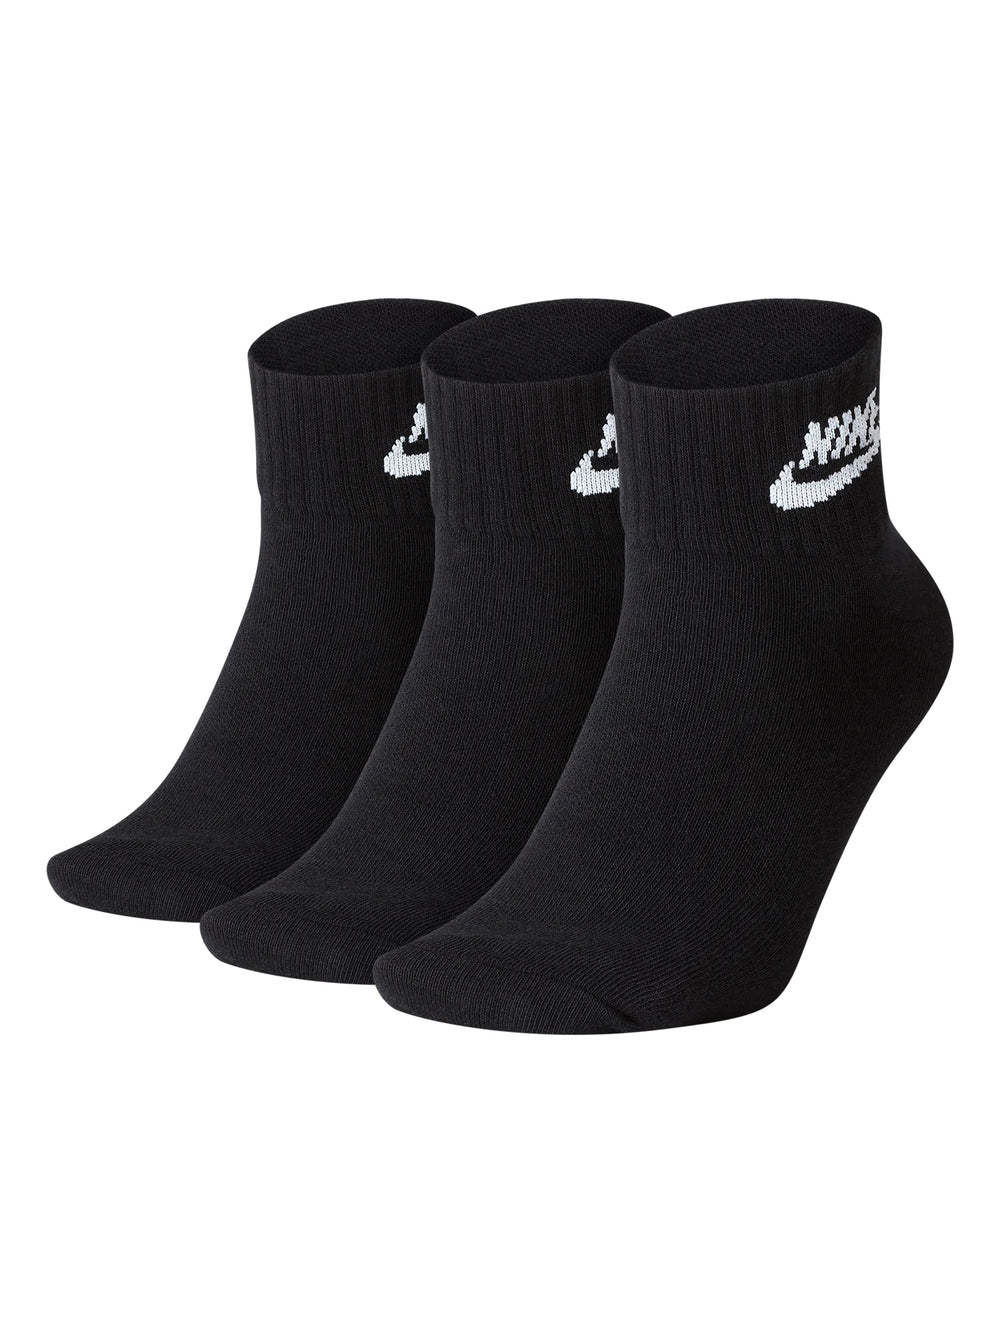 NIKE EVERY DAY ESSENTIALS ANKLE SOCKS 3 PACKS